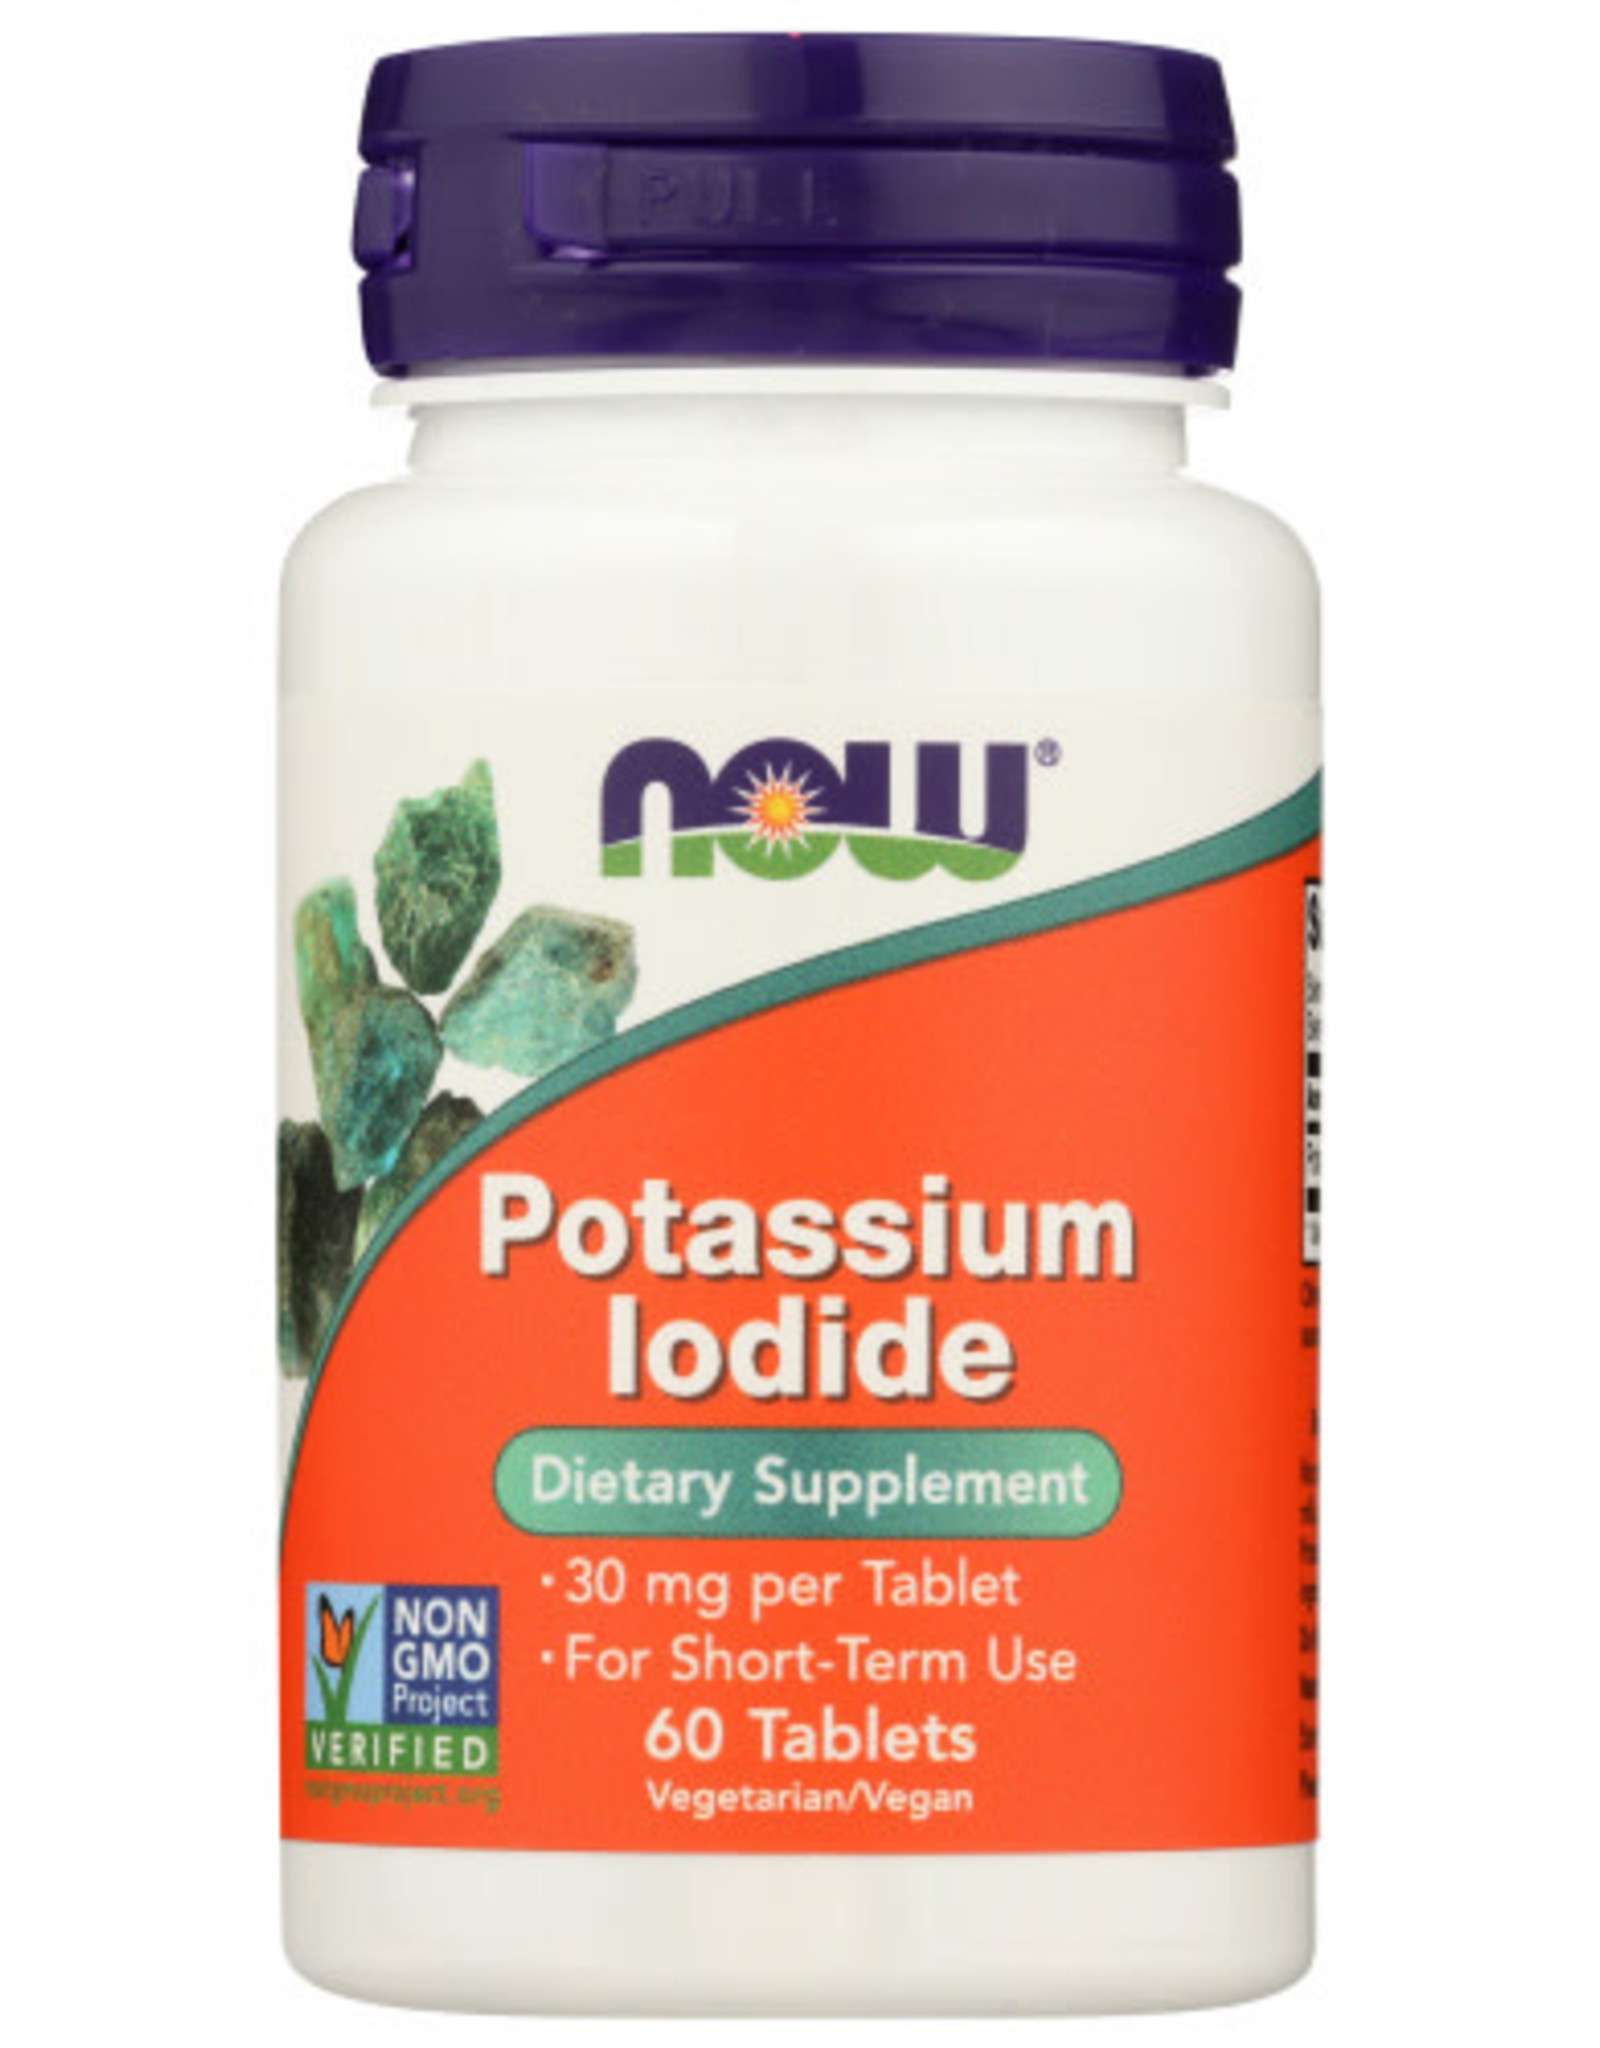 NOW FOODS X Now Potassium Iodide Dietary Supplement 60 Tablets